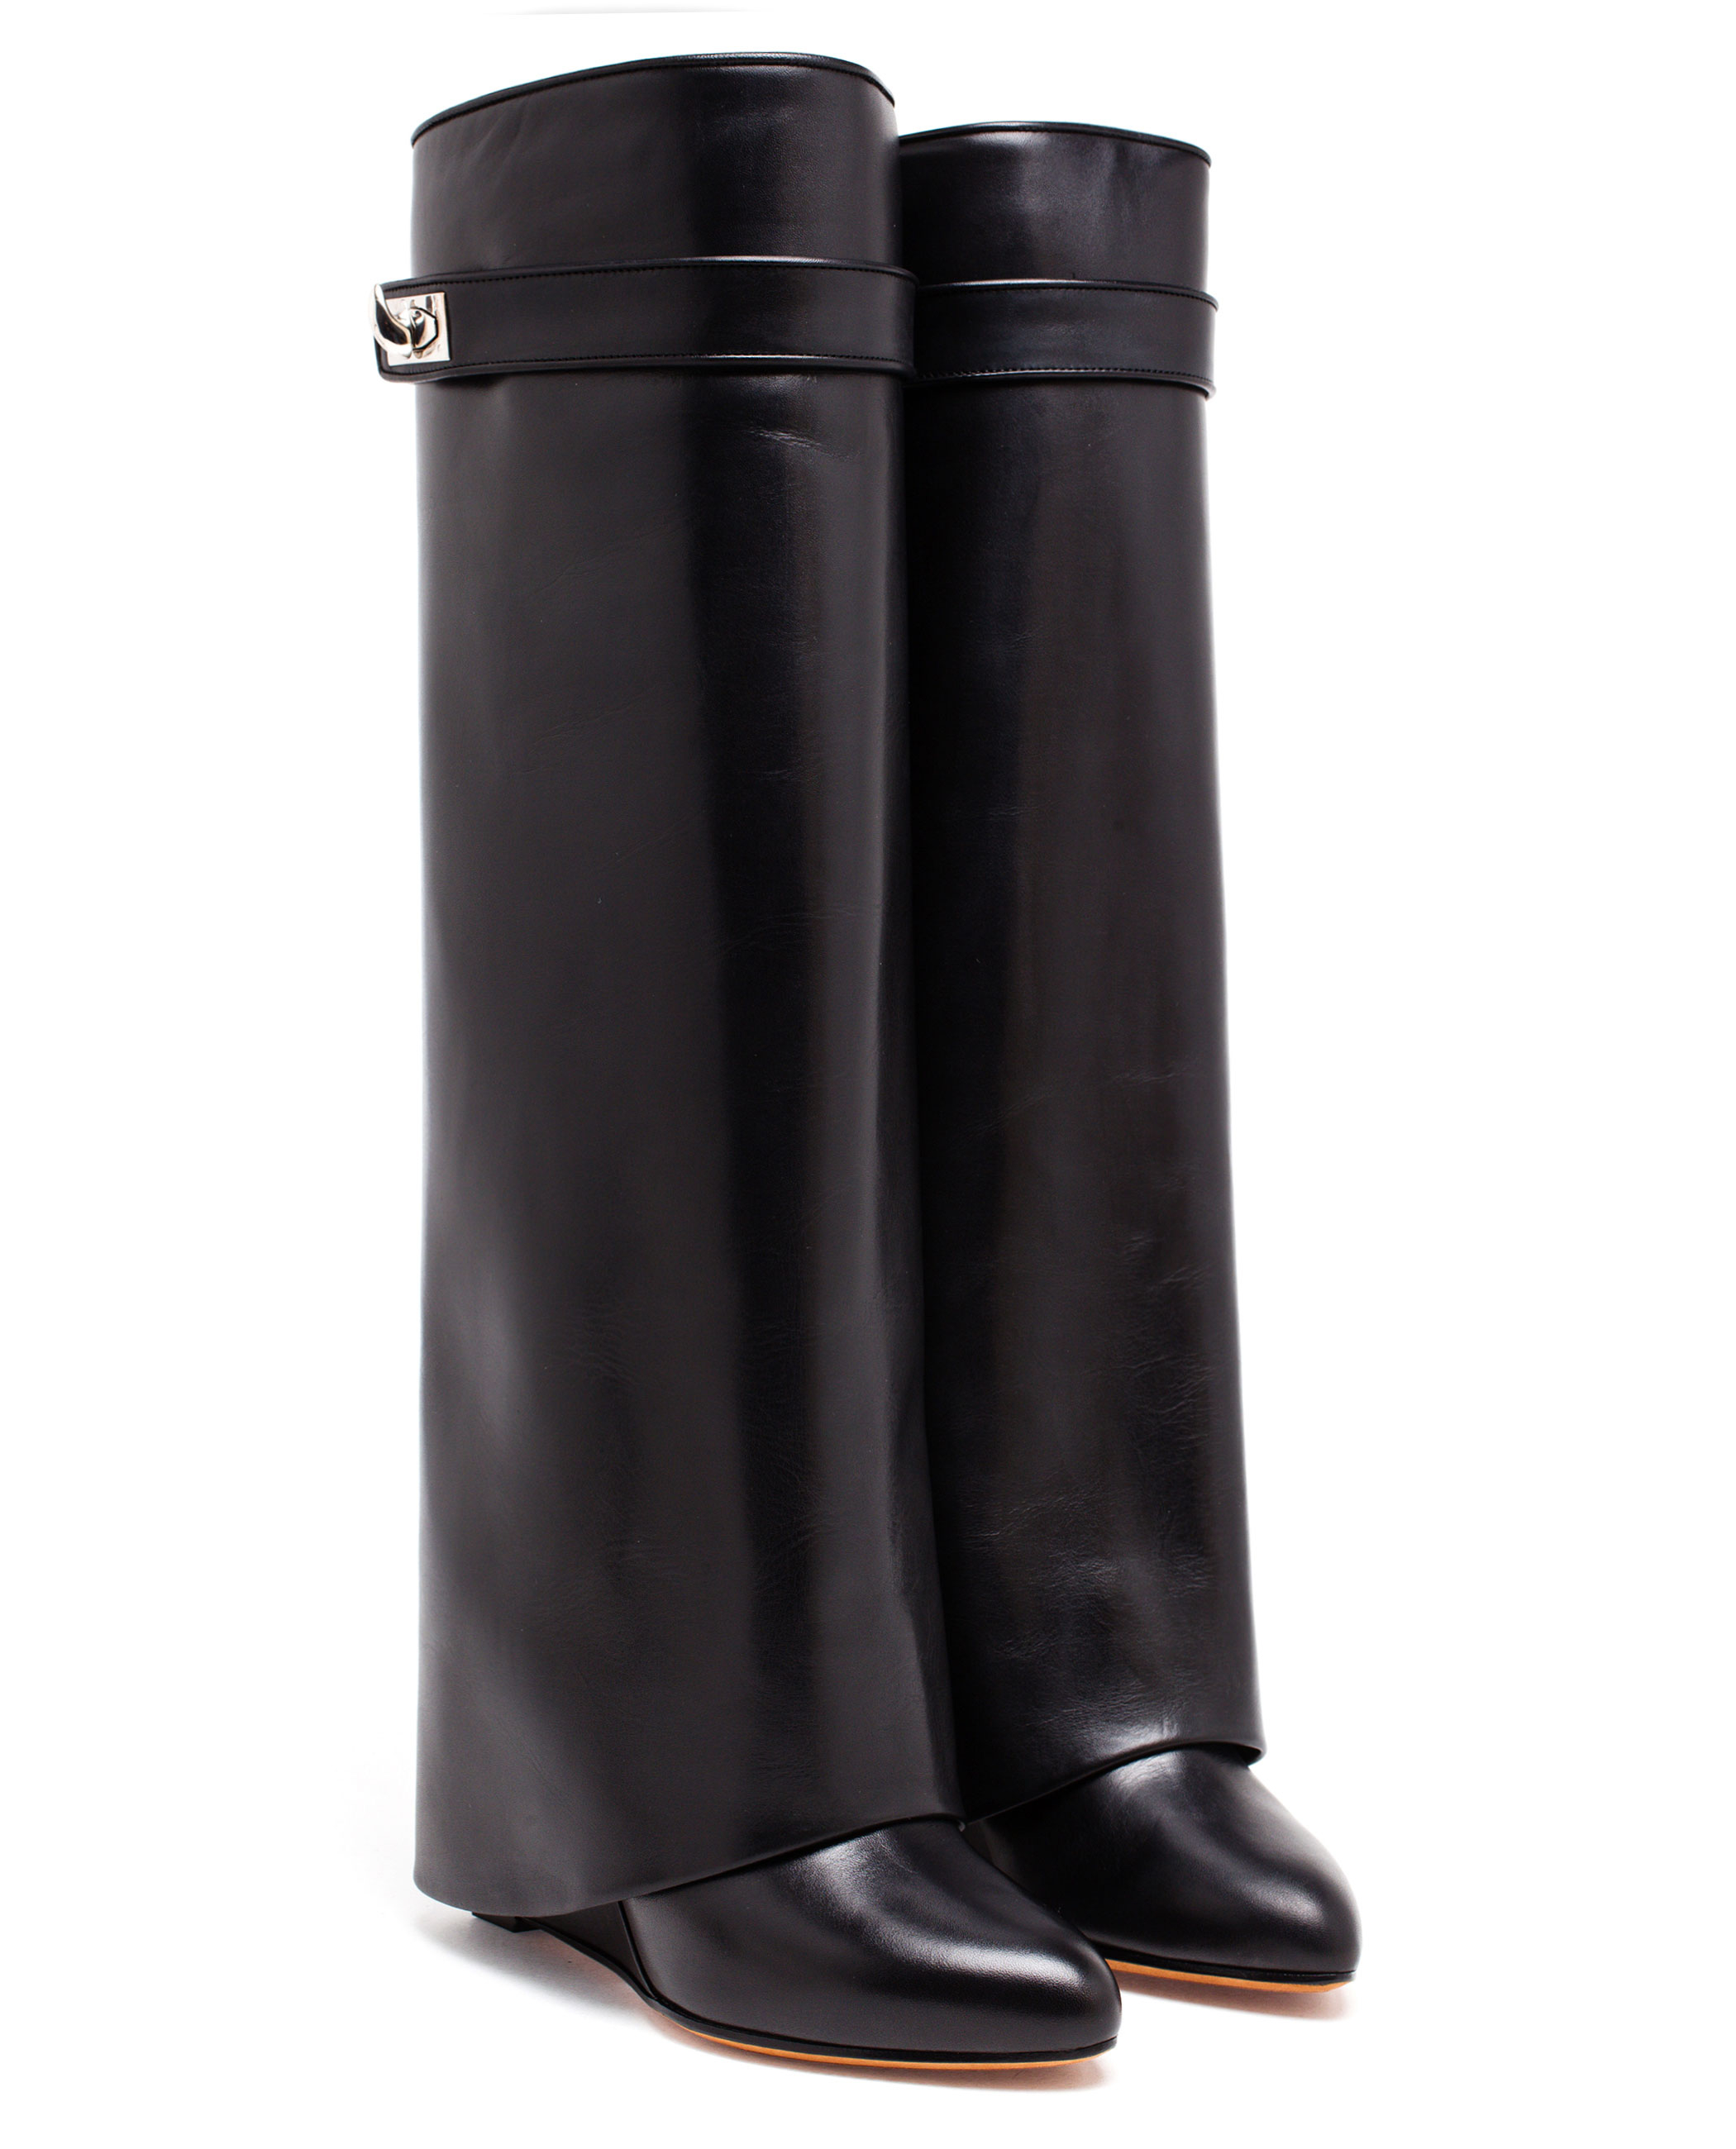 Givenchy Shark Lock Knee-high Leather Wedge Boots in Black | Lyst